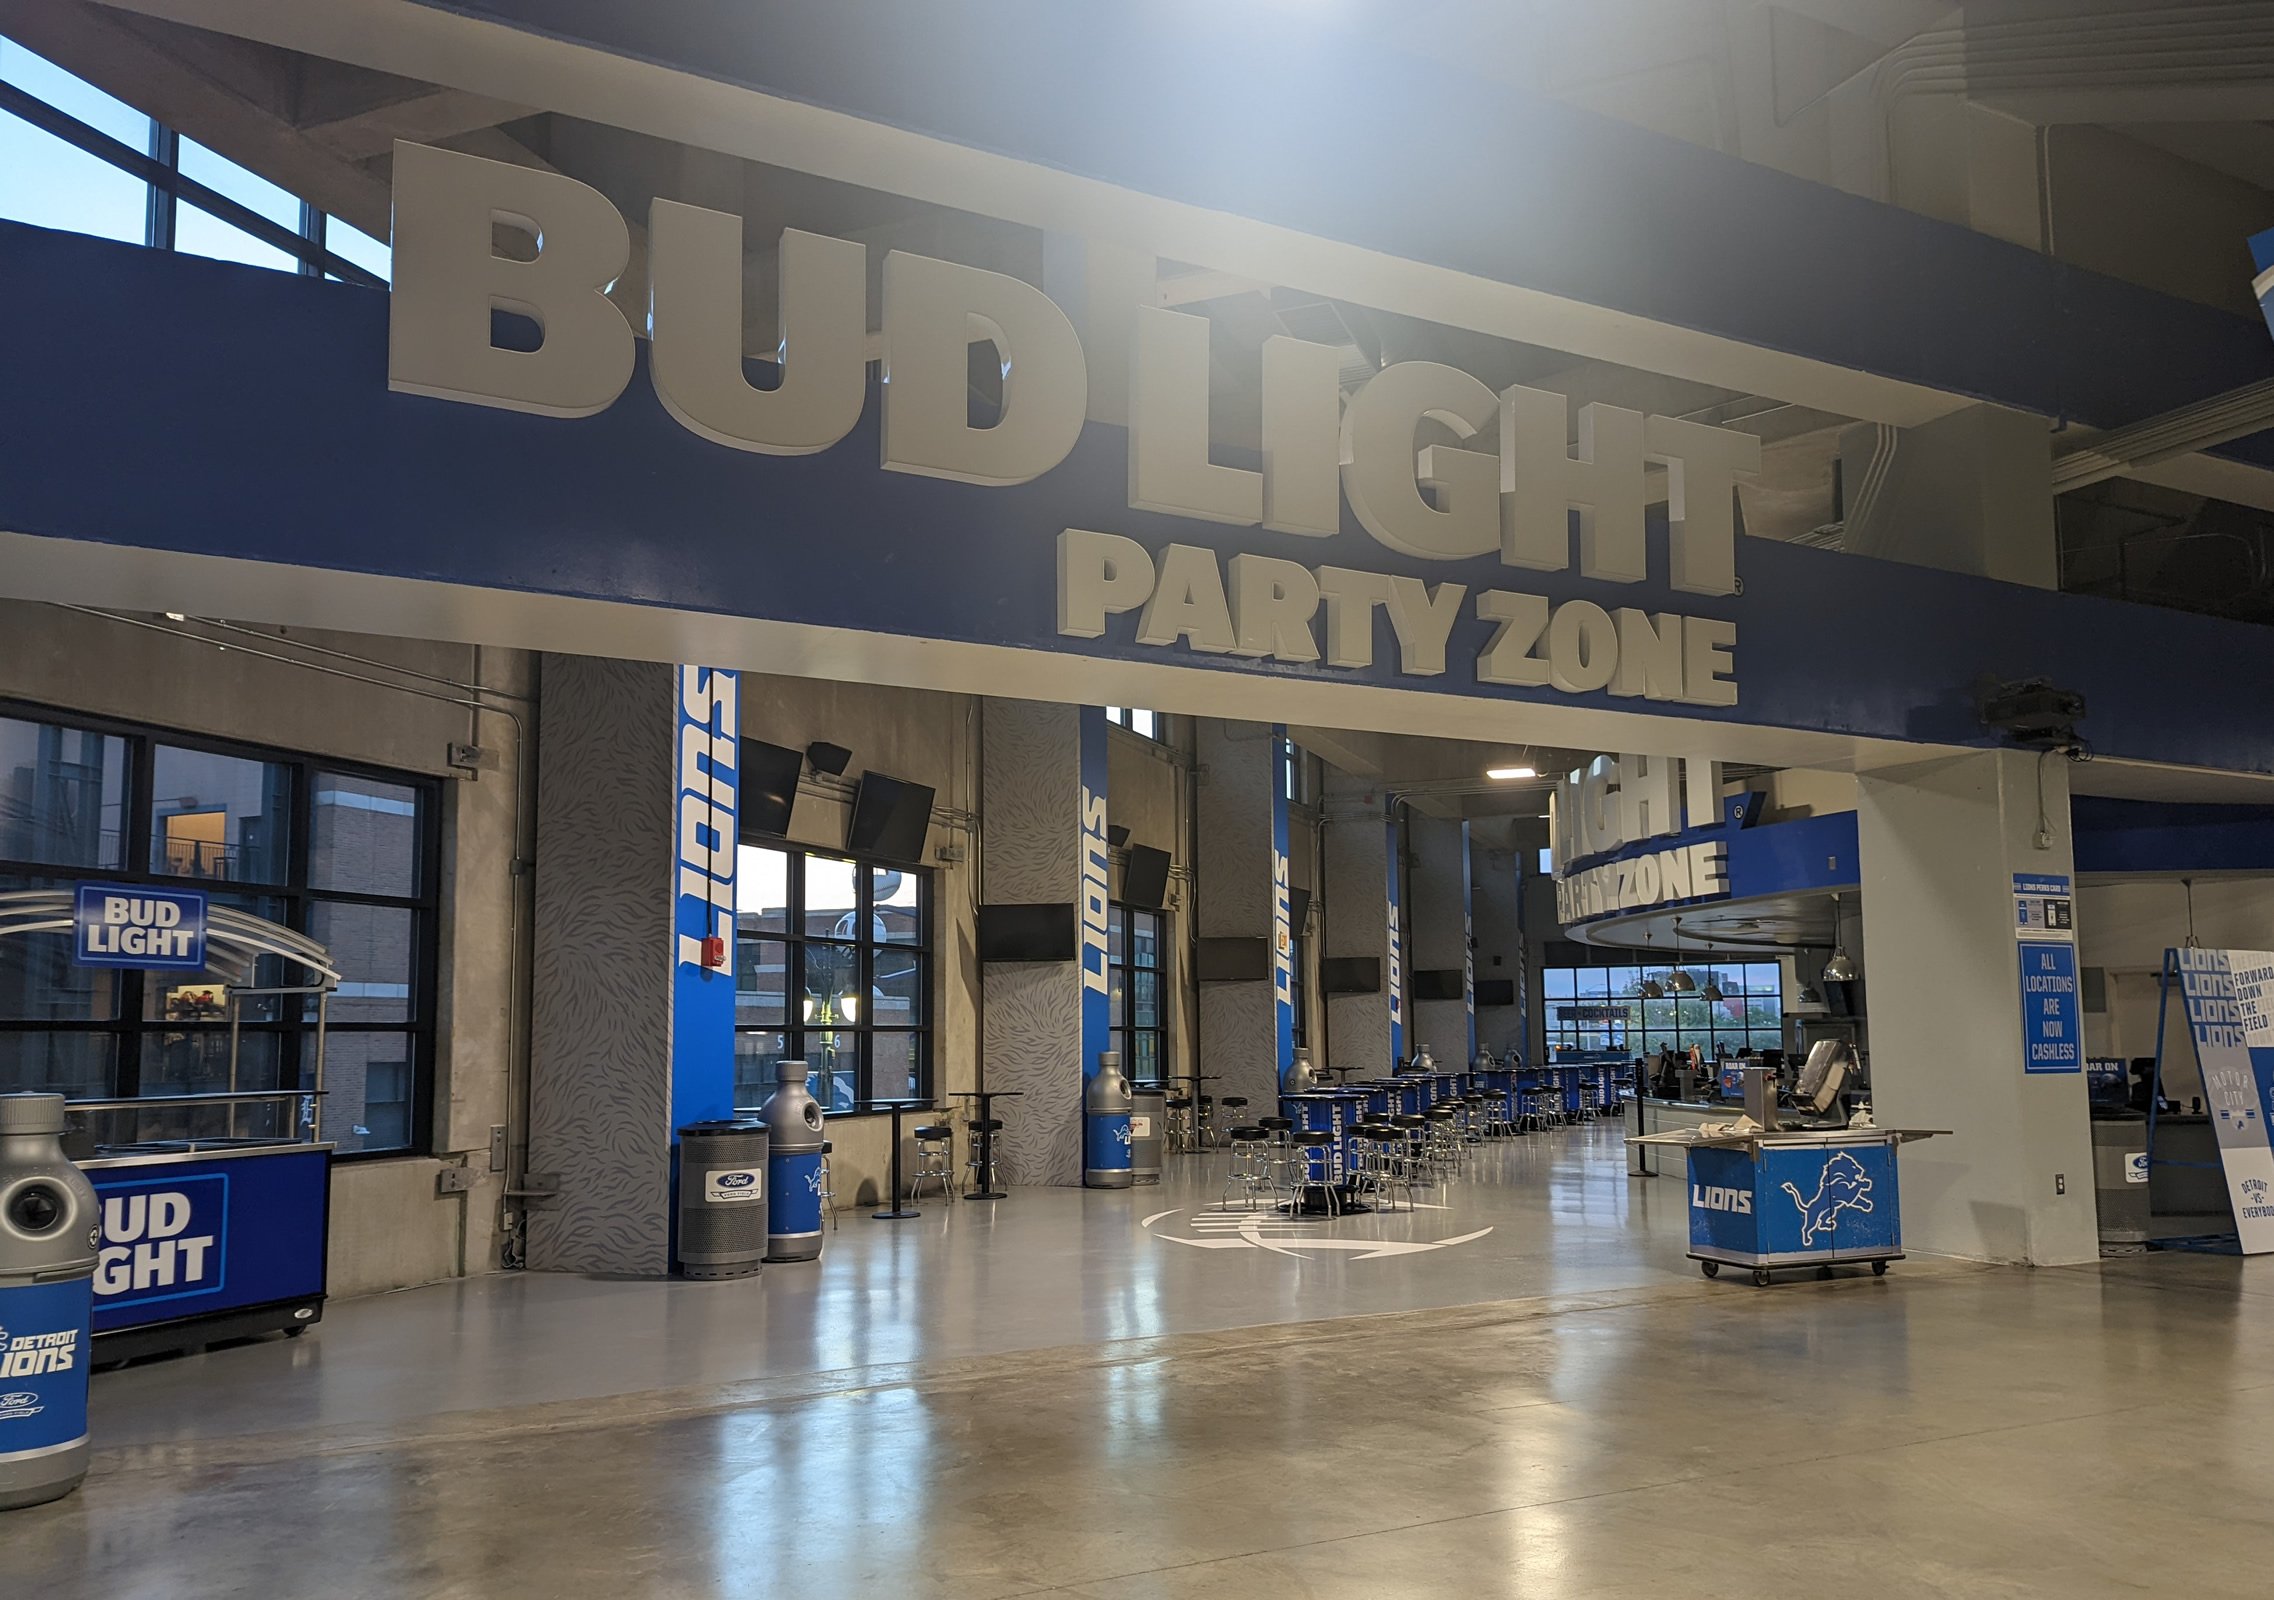 ford field bud light party zone